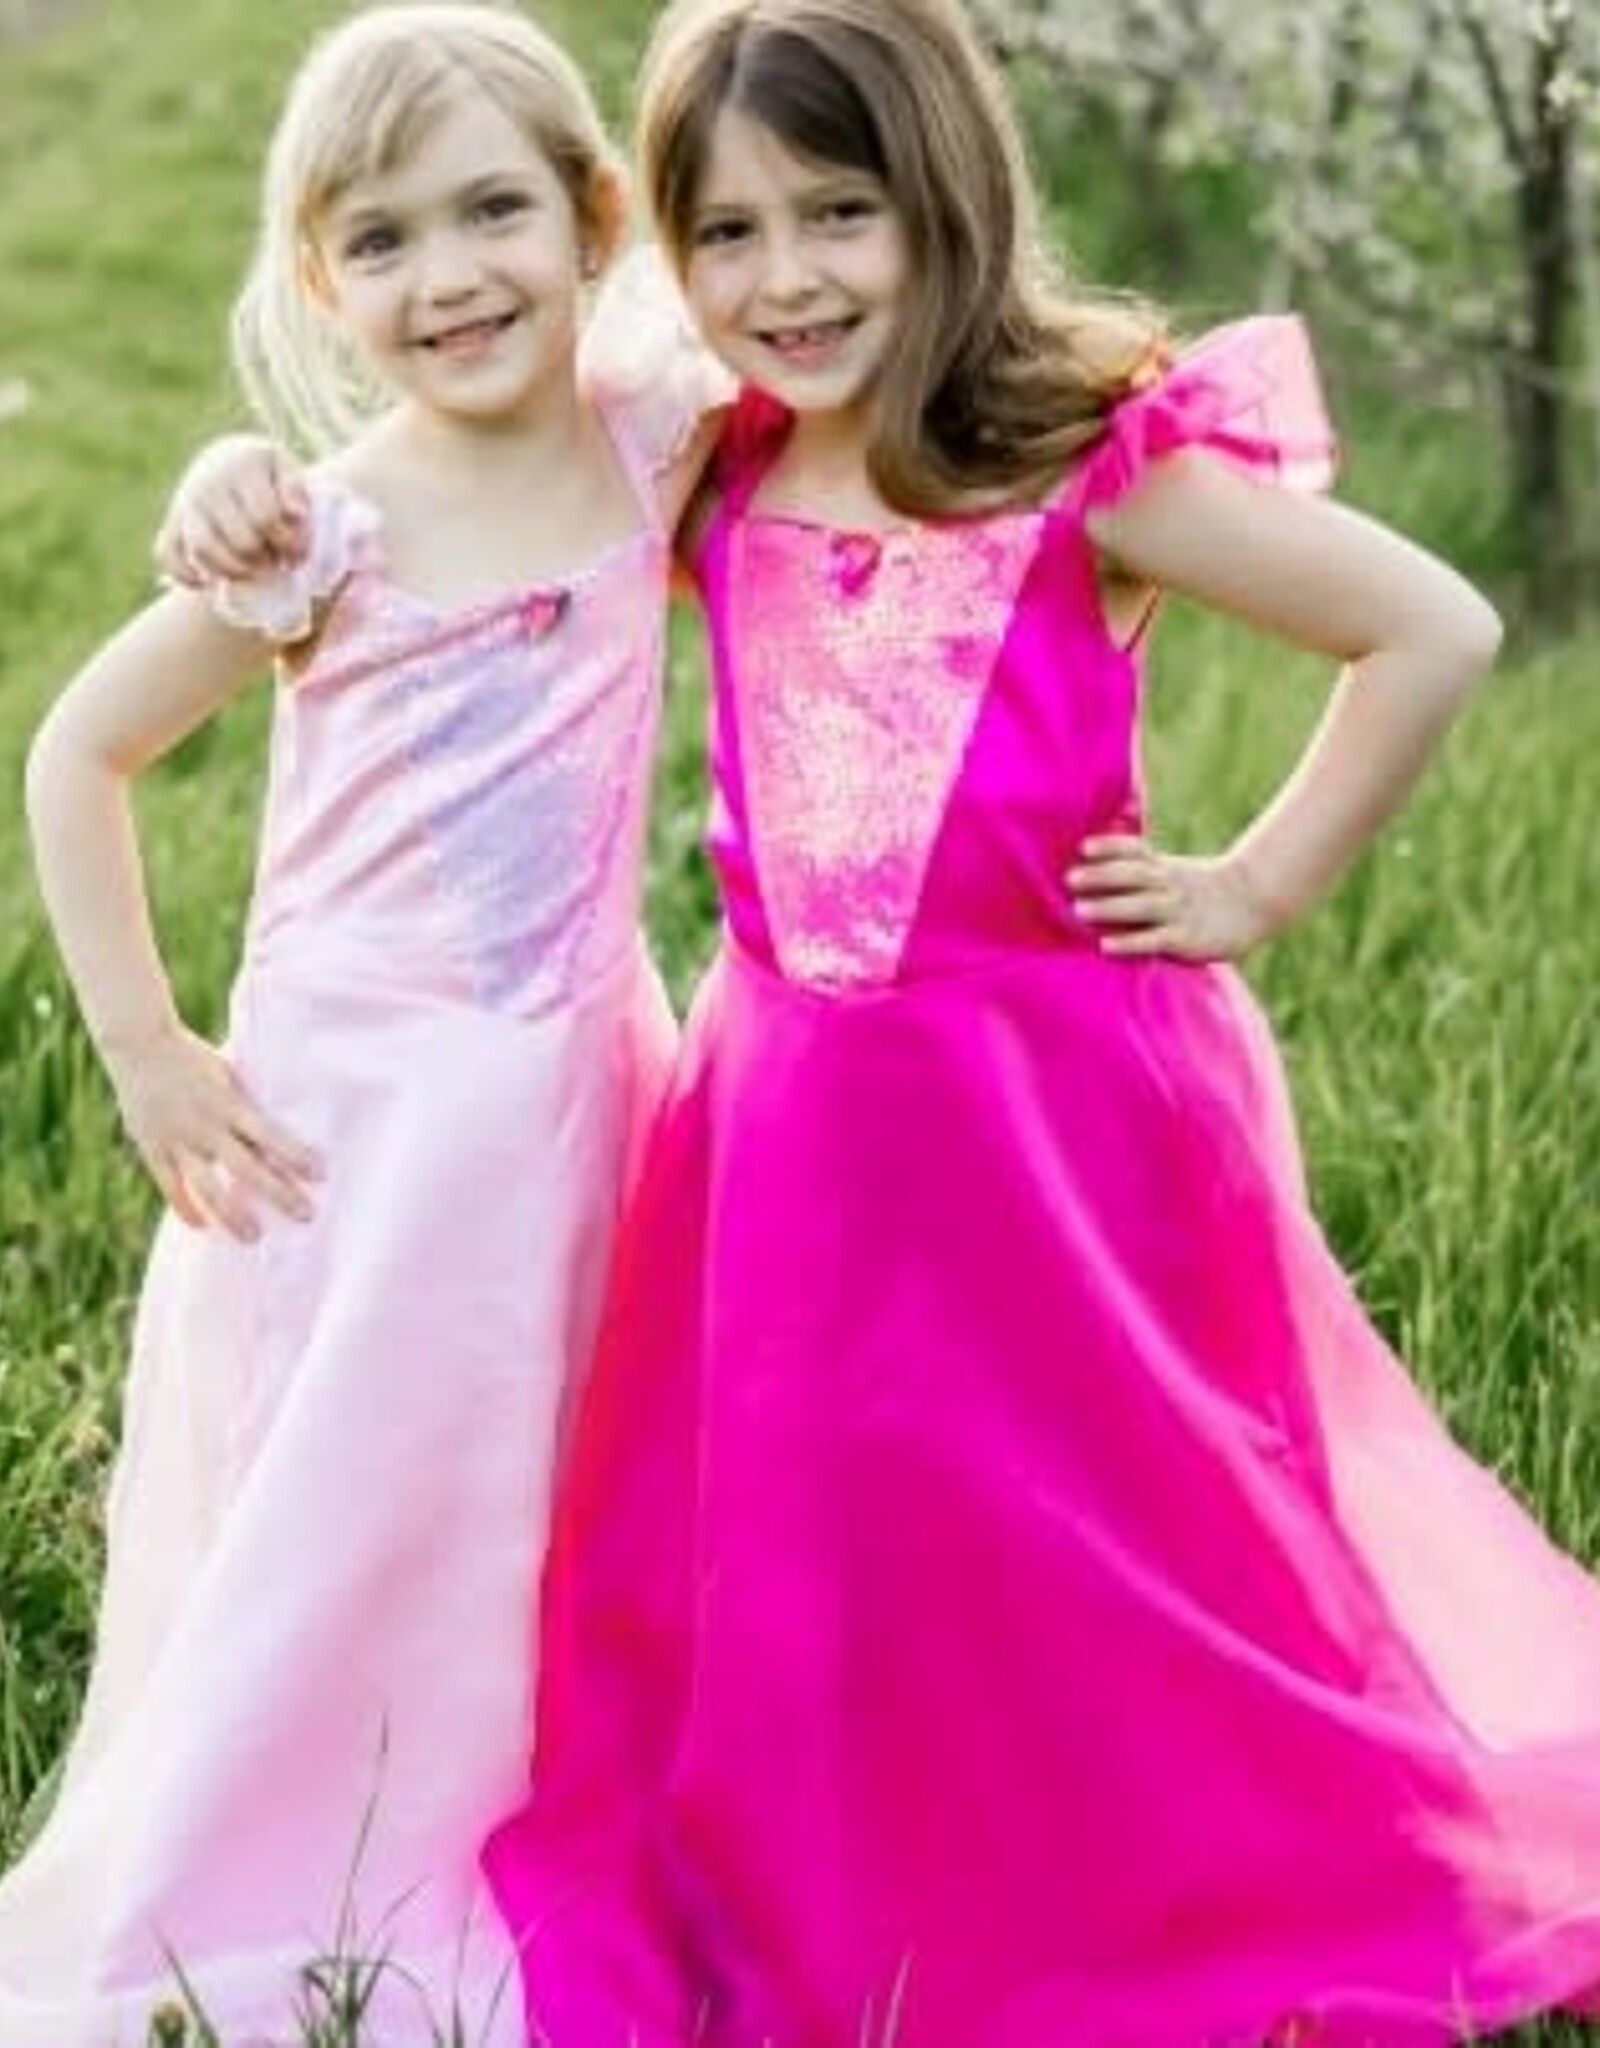 Great Pretenders Party Princess Dress, Hot Pink, Size 7-8